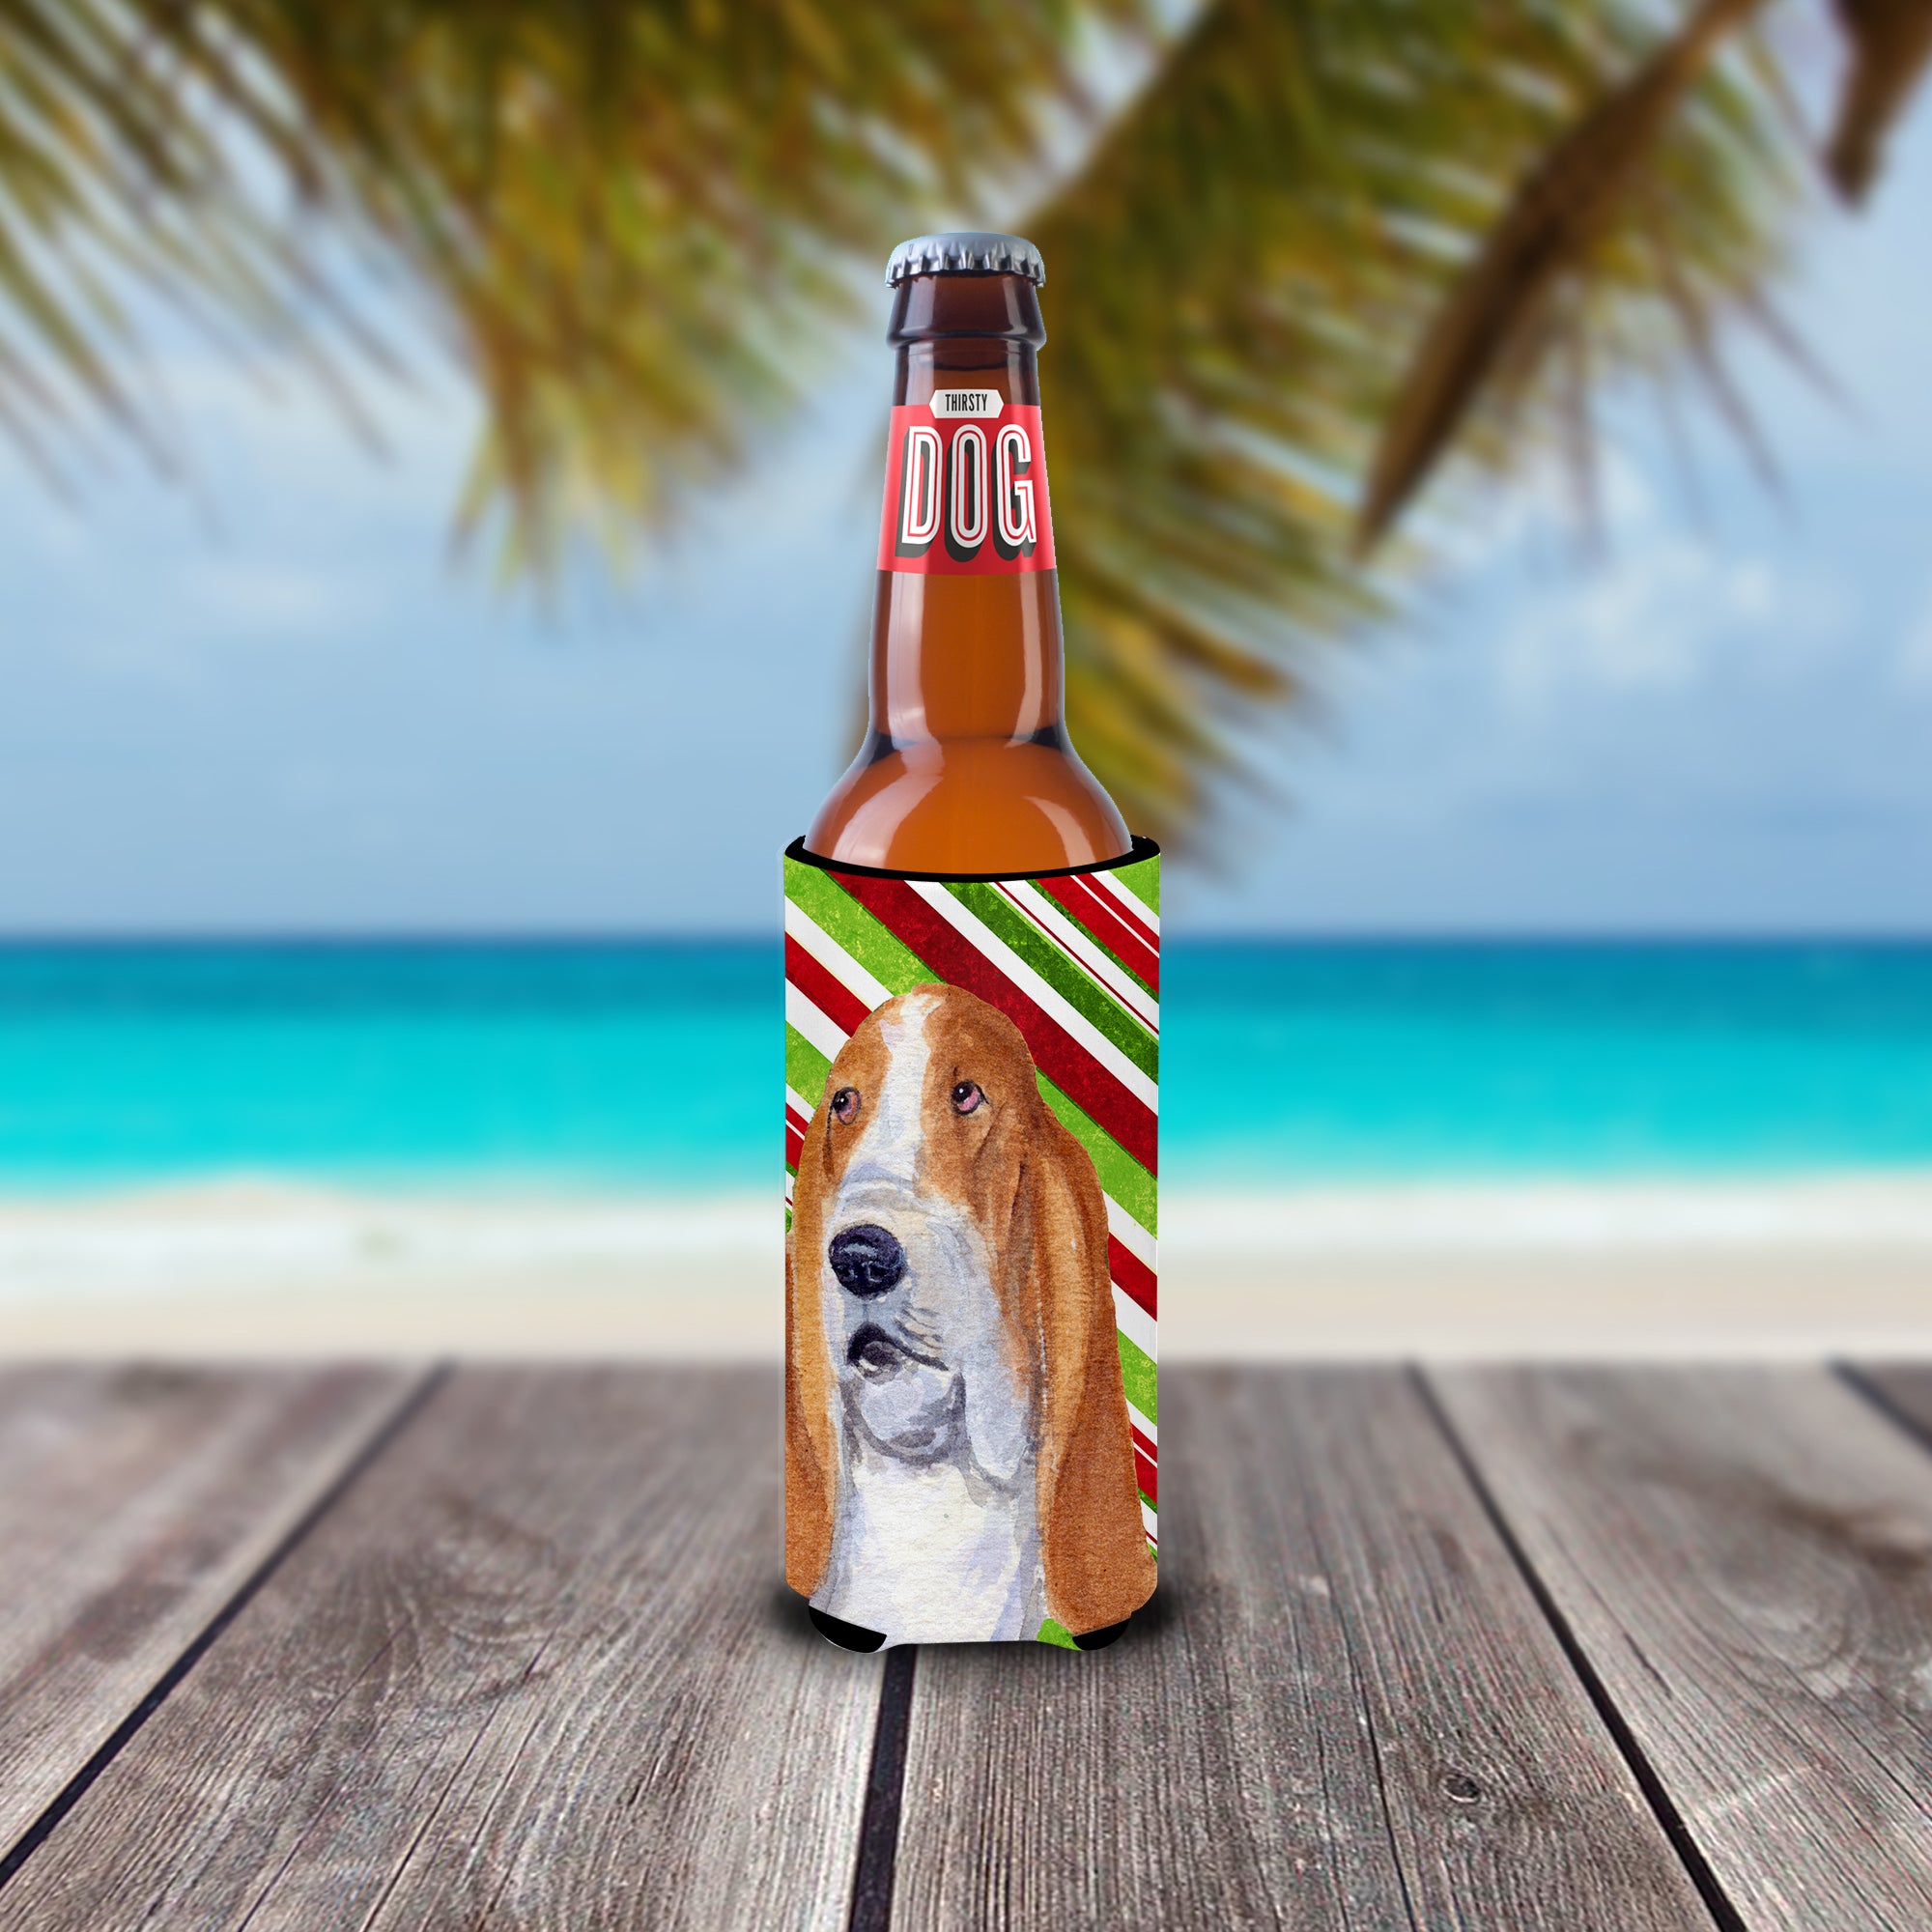 Basset Hound Candy Cane Holiday Christmas Ultra Beverage Insulators for slim cans SS4597MUK.